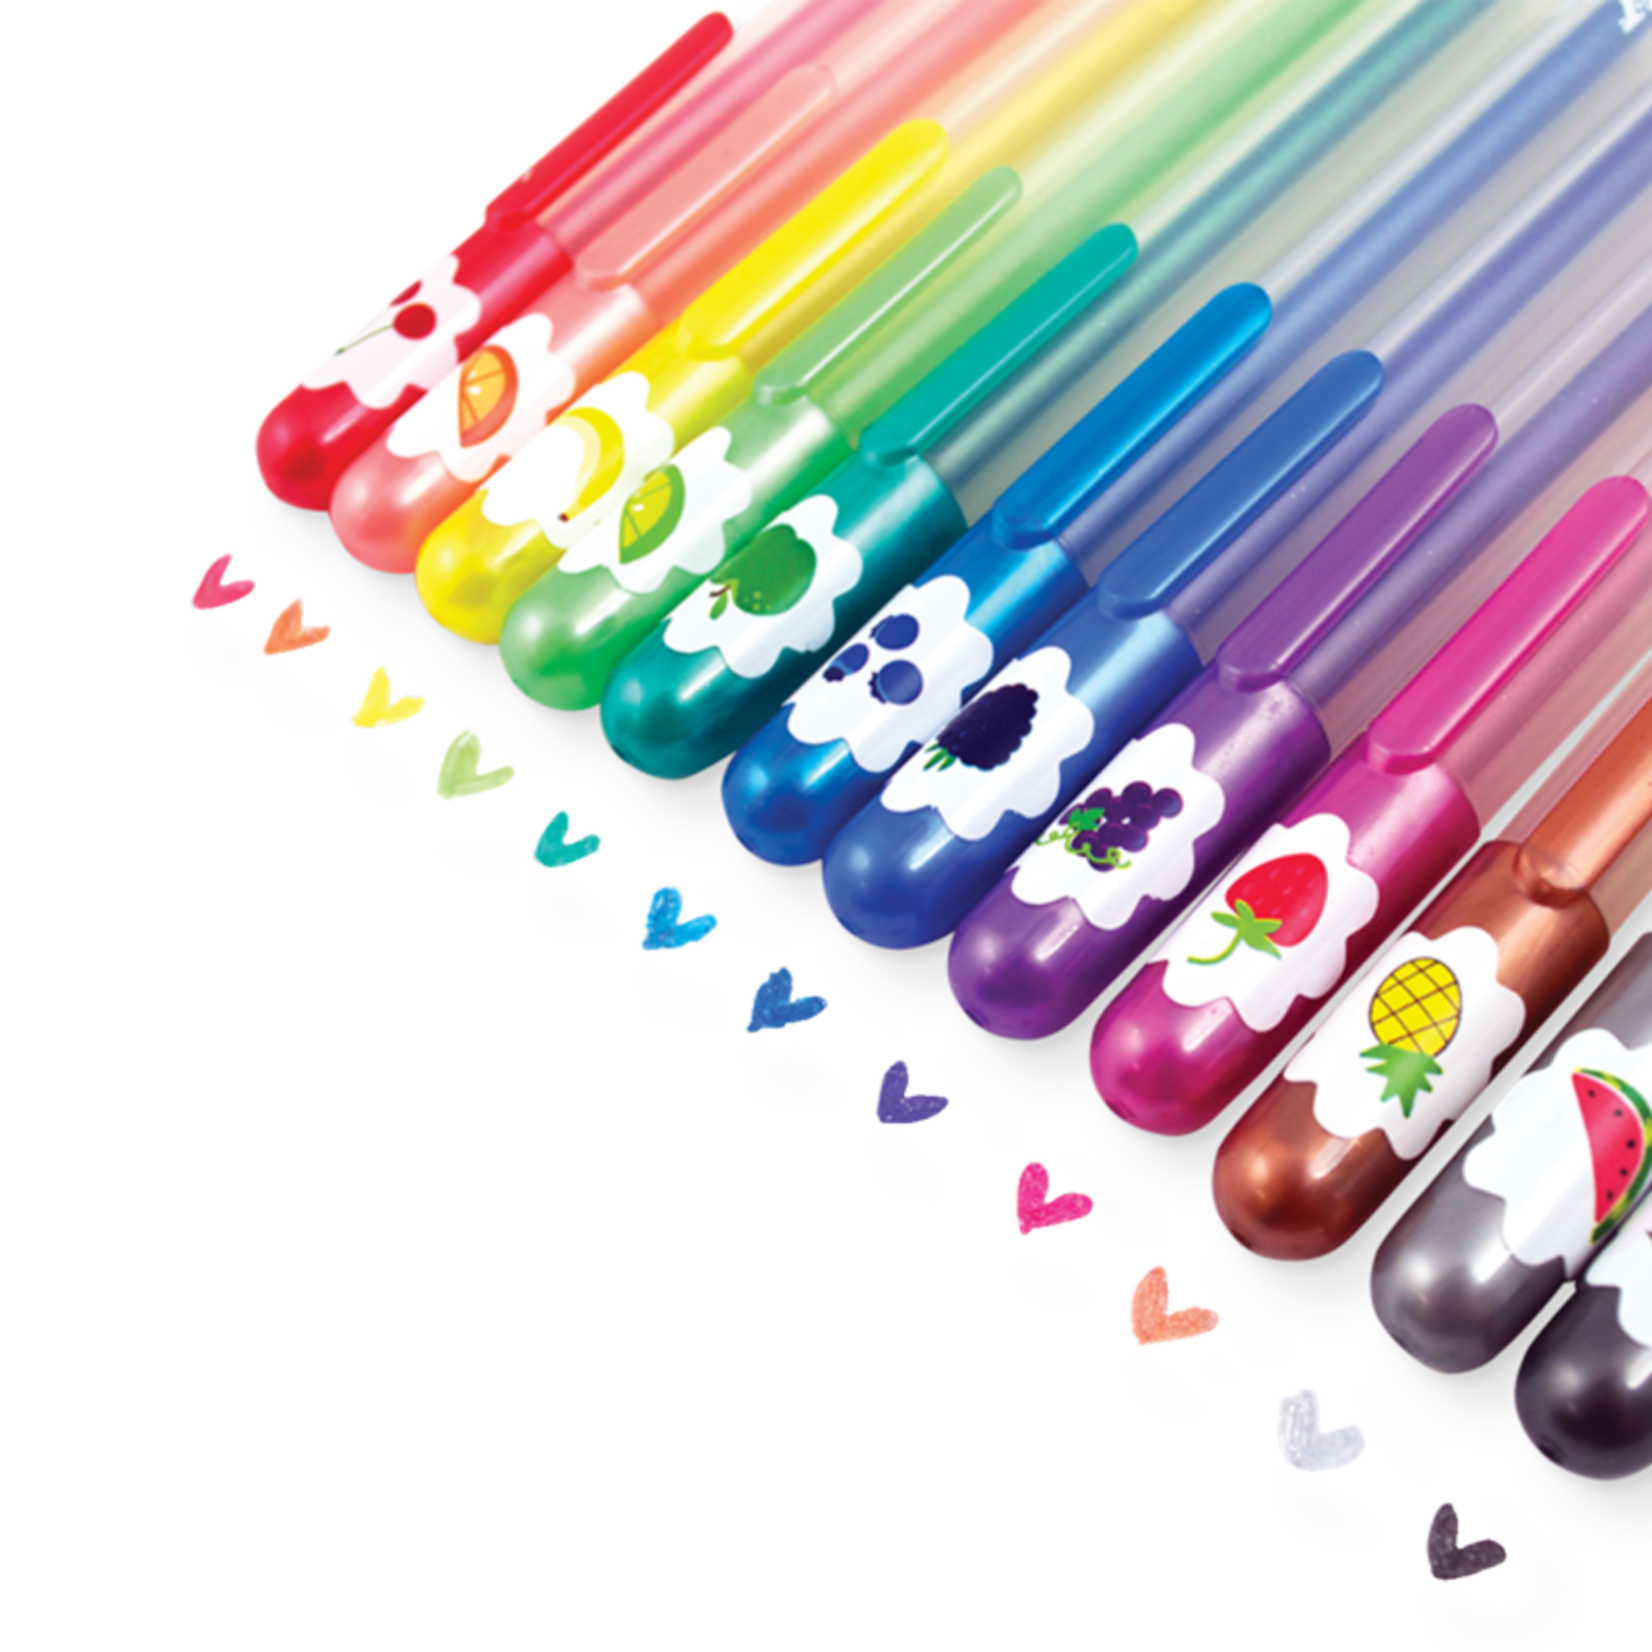 Yummy Scented Glitter Gel Pens - Smell Good Enough To Eat. - Exit9